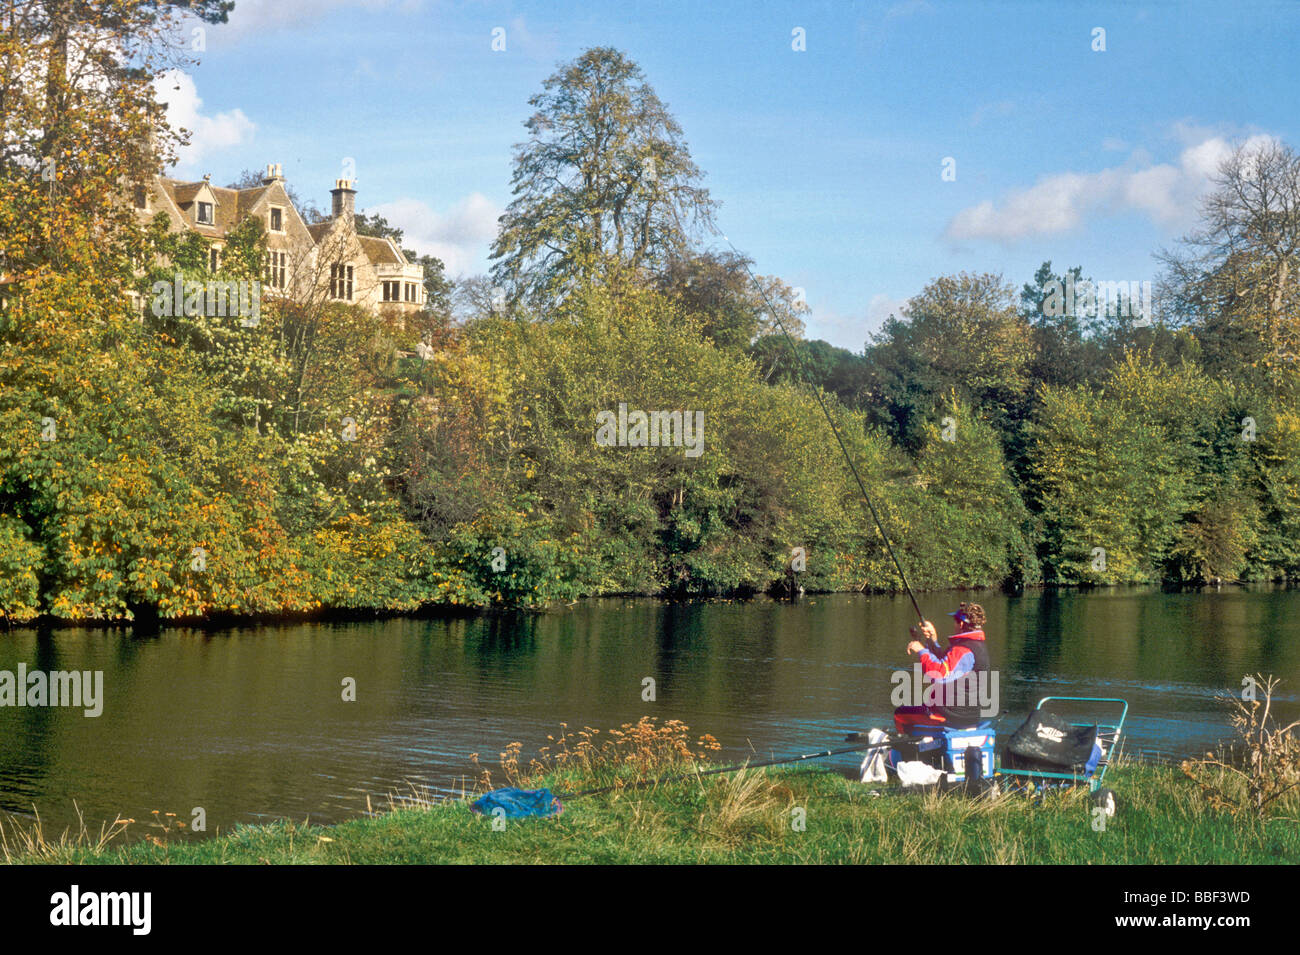 Angling on the River Thames at Clifton Hampden in Oxfordshire England UK Stock Photo